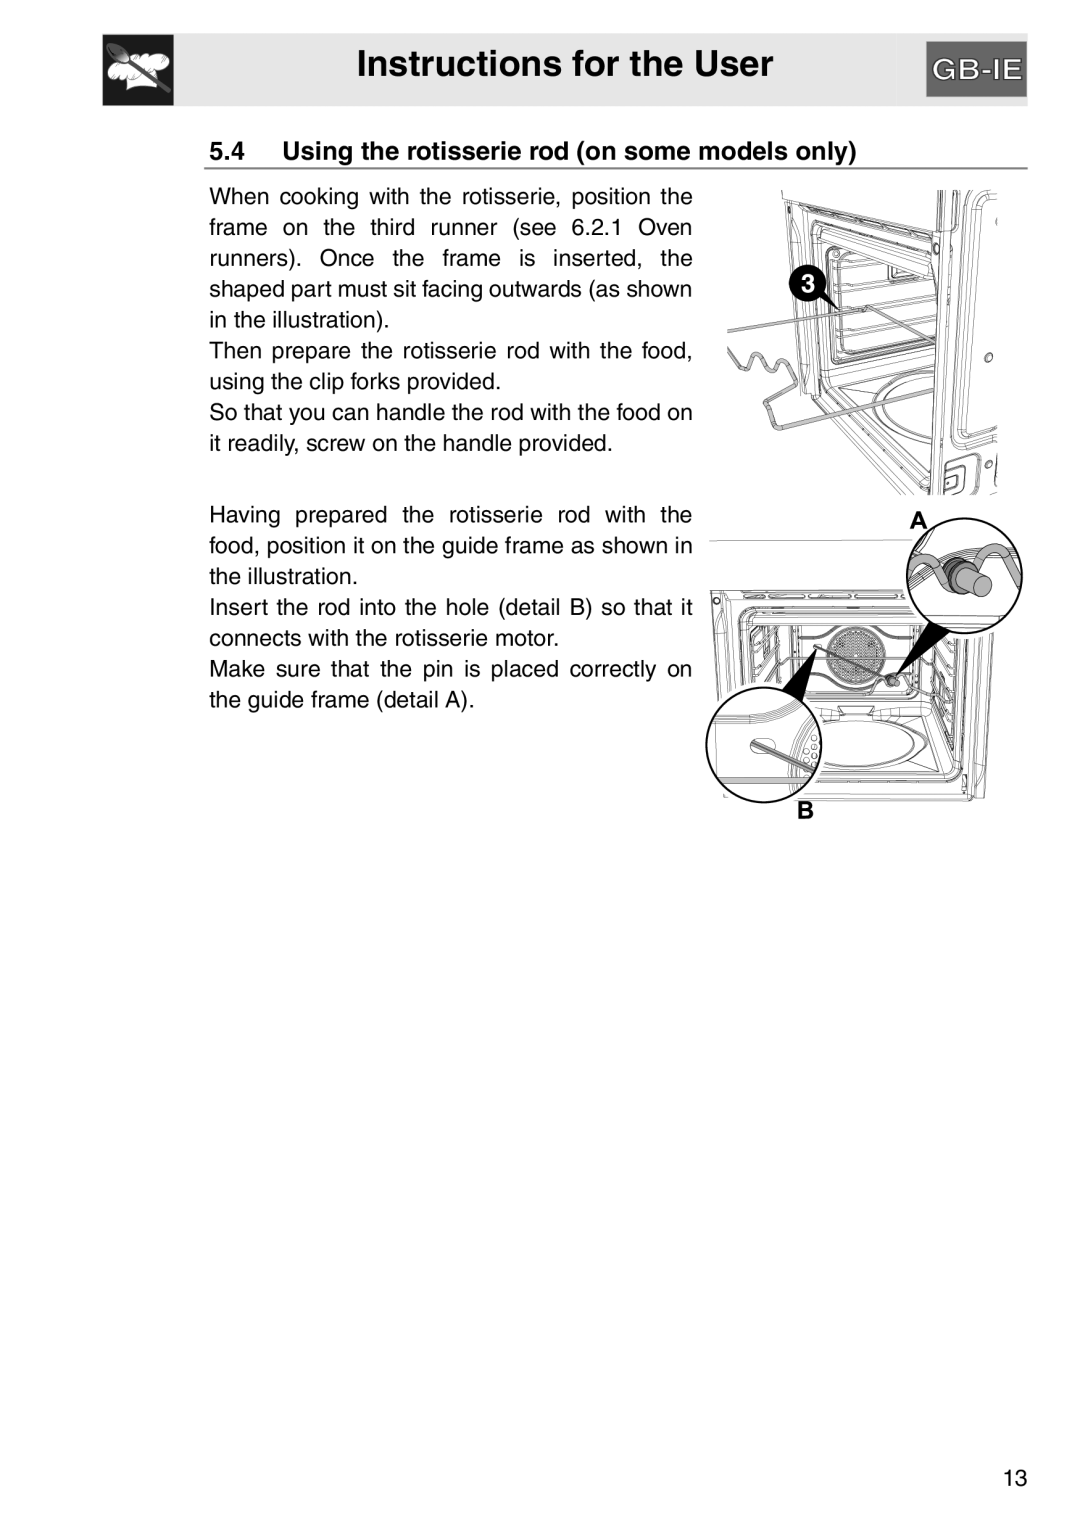 Smeg SAP112-8 manual Instructions for the User, 5.4Using the rotisserie rod on some models only 